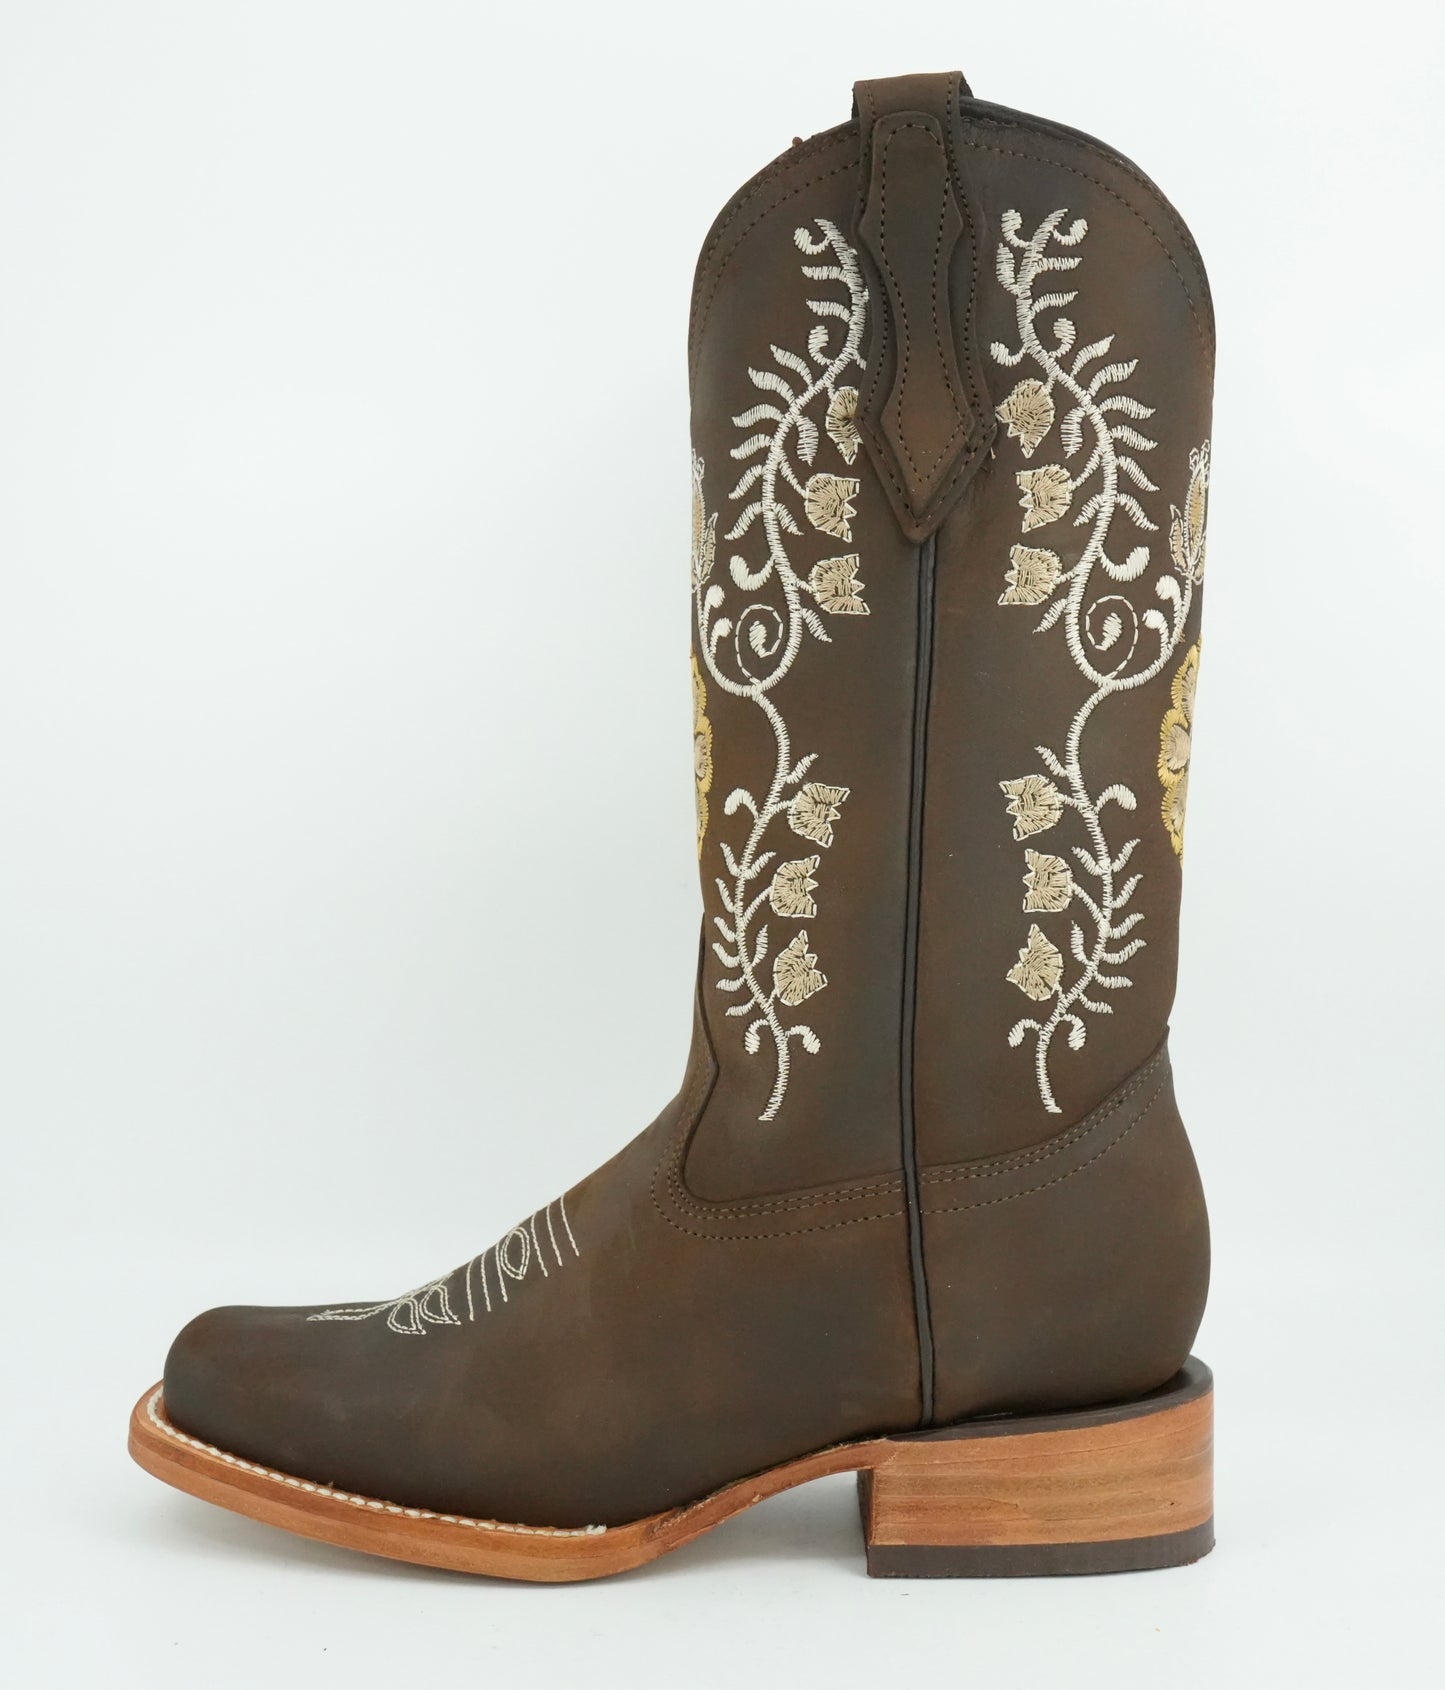 La Sierra Women's Tabaco Embroidered Floral Square Toe Boot